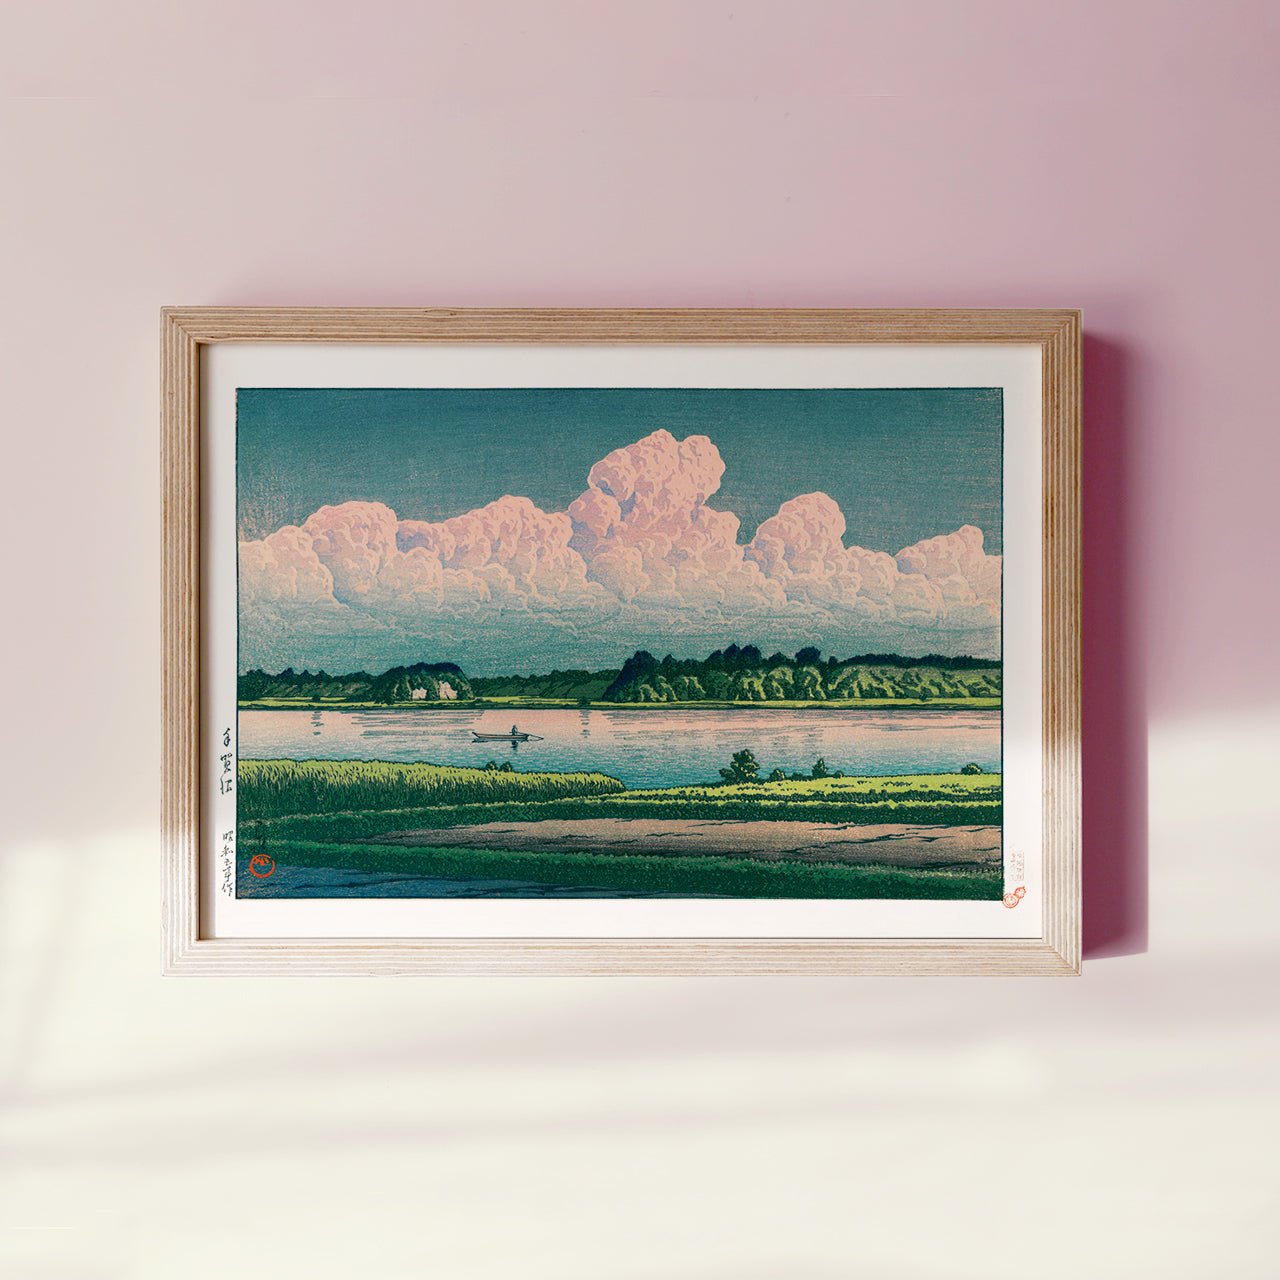 Framed Japanese Art Poster: Summer Dusk. Iridocumulus clouds tinged with pink, painting of clouds over the water